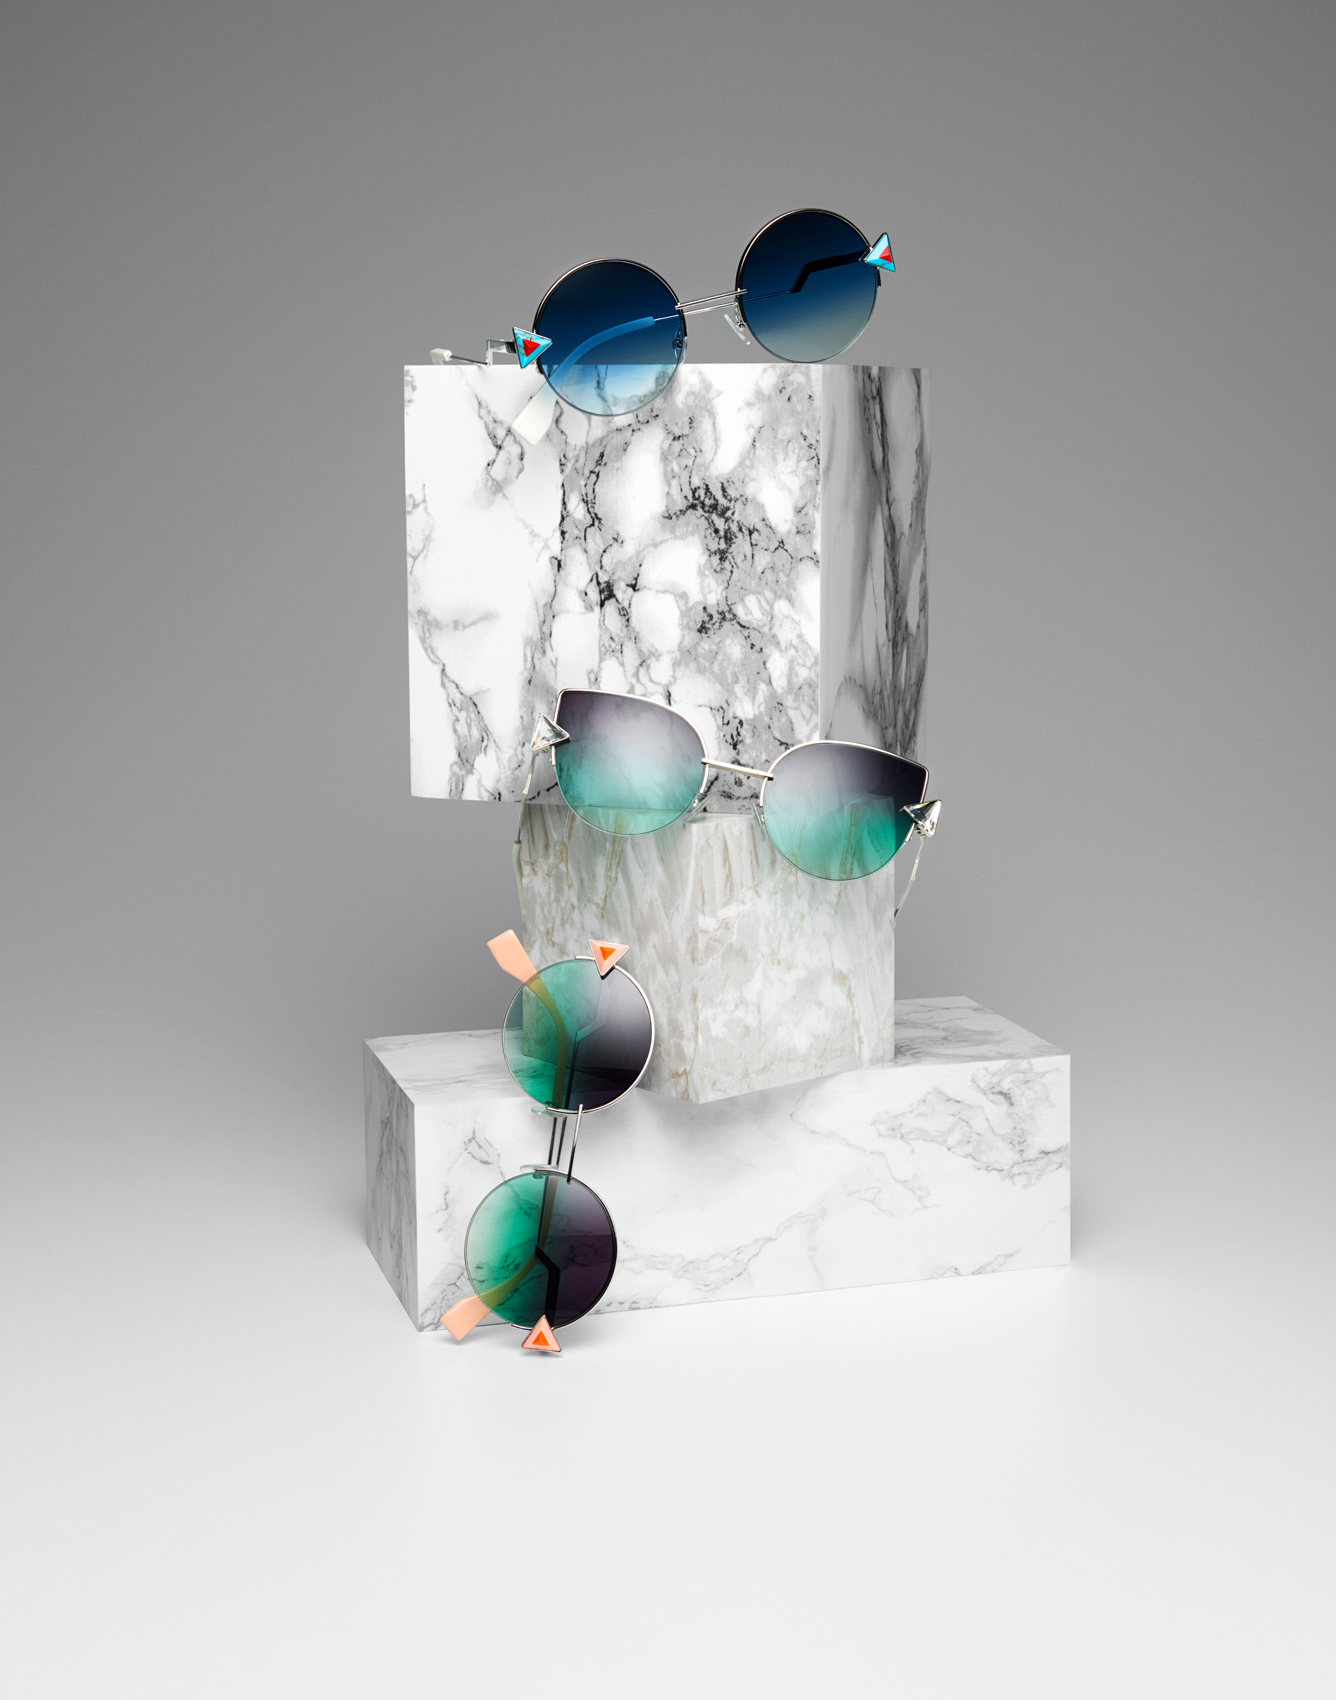 Sunglasses photography by Alexander Kent London based still life and product photographer.